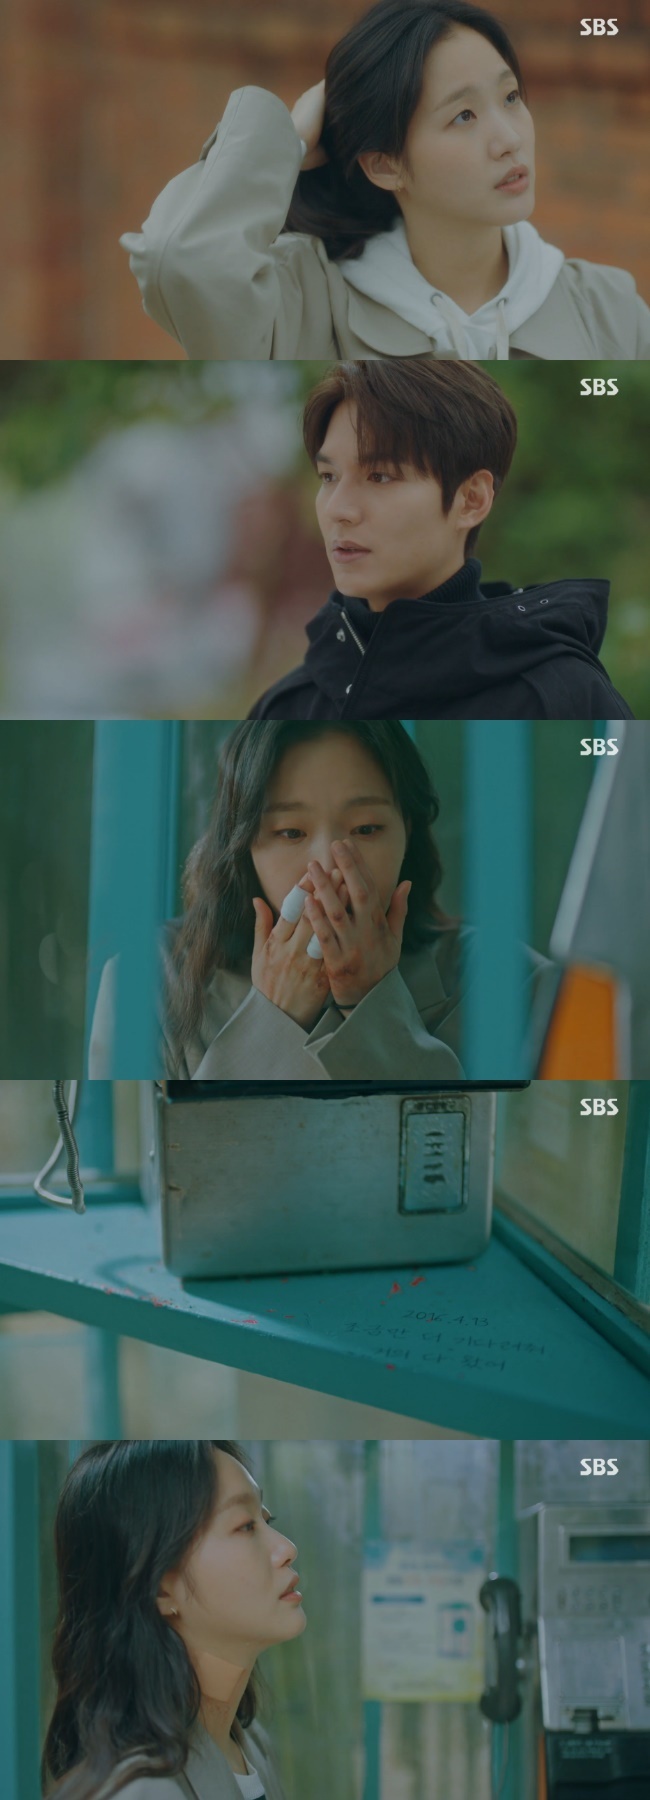 Kim Go-eun tears at Lee Min-hos Message, which transcends time and spaceLee Min-ho, who was on SBSs gilt drama The King: The Lord of Eternity (played by Kim Eun-sook/directed by Baek Sang-hoon and Jung Ji-hyun), aired on June 5, traveled time in the door of the dimension to meet Jung Tae-eul in 2020.Igon, who had returned to the night of the reverse, knew that he could move the construction only at the moment of one mind.So Igon knew that he had to spend four months in the door of the dimension until he returned to 2020.In 1994, Lee went to see Jeong Tae-eun, who was five years old, and then went back to Jeong Tae-eun in April 2016. Jeong Tae-eun recognized Lee Gon, who had the same face as the person he met when he was five years old.I was just about to, but its sad when you dont know me, and thats why I came here, to stay in your memory today, Igon said. Were living at a different time.So please do not be tired until I arrive. When Igon asked him to be kind to him a little more when he met again in Gwanghwamun, he asked him, Why do you meet again?The reason I cant come to see you at all hours is because the cracks in my mind are getting worse.Lee Ha-na